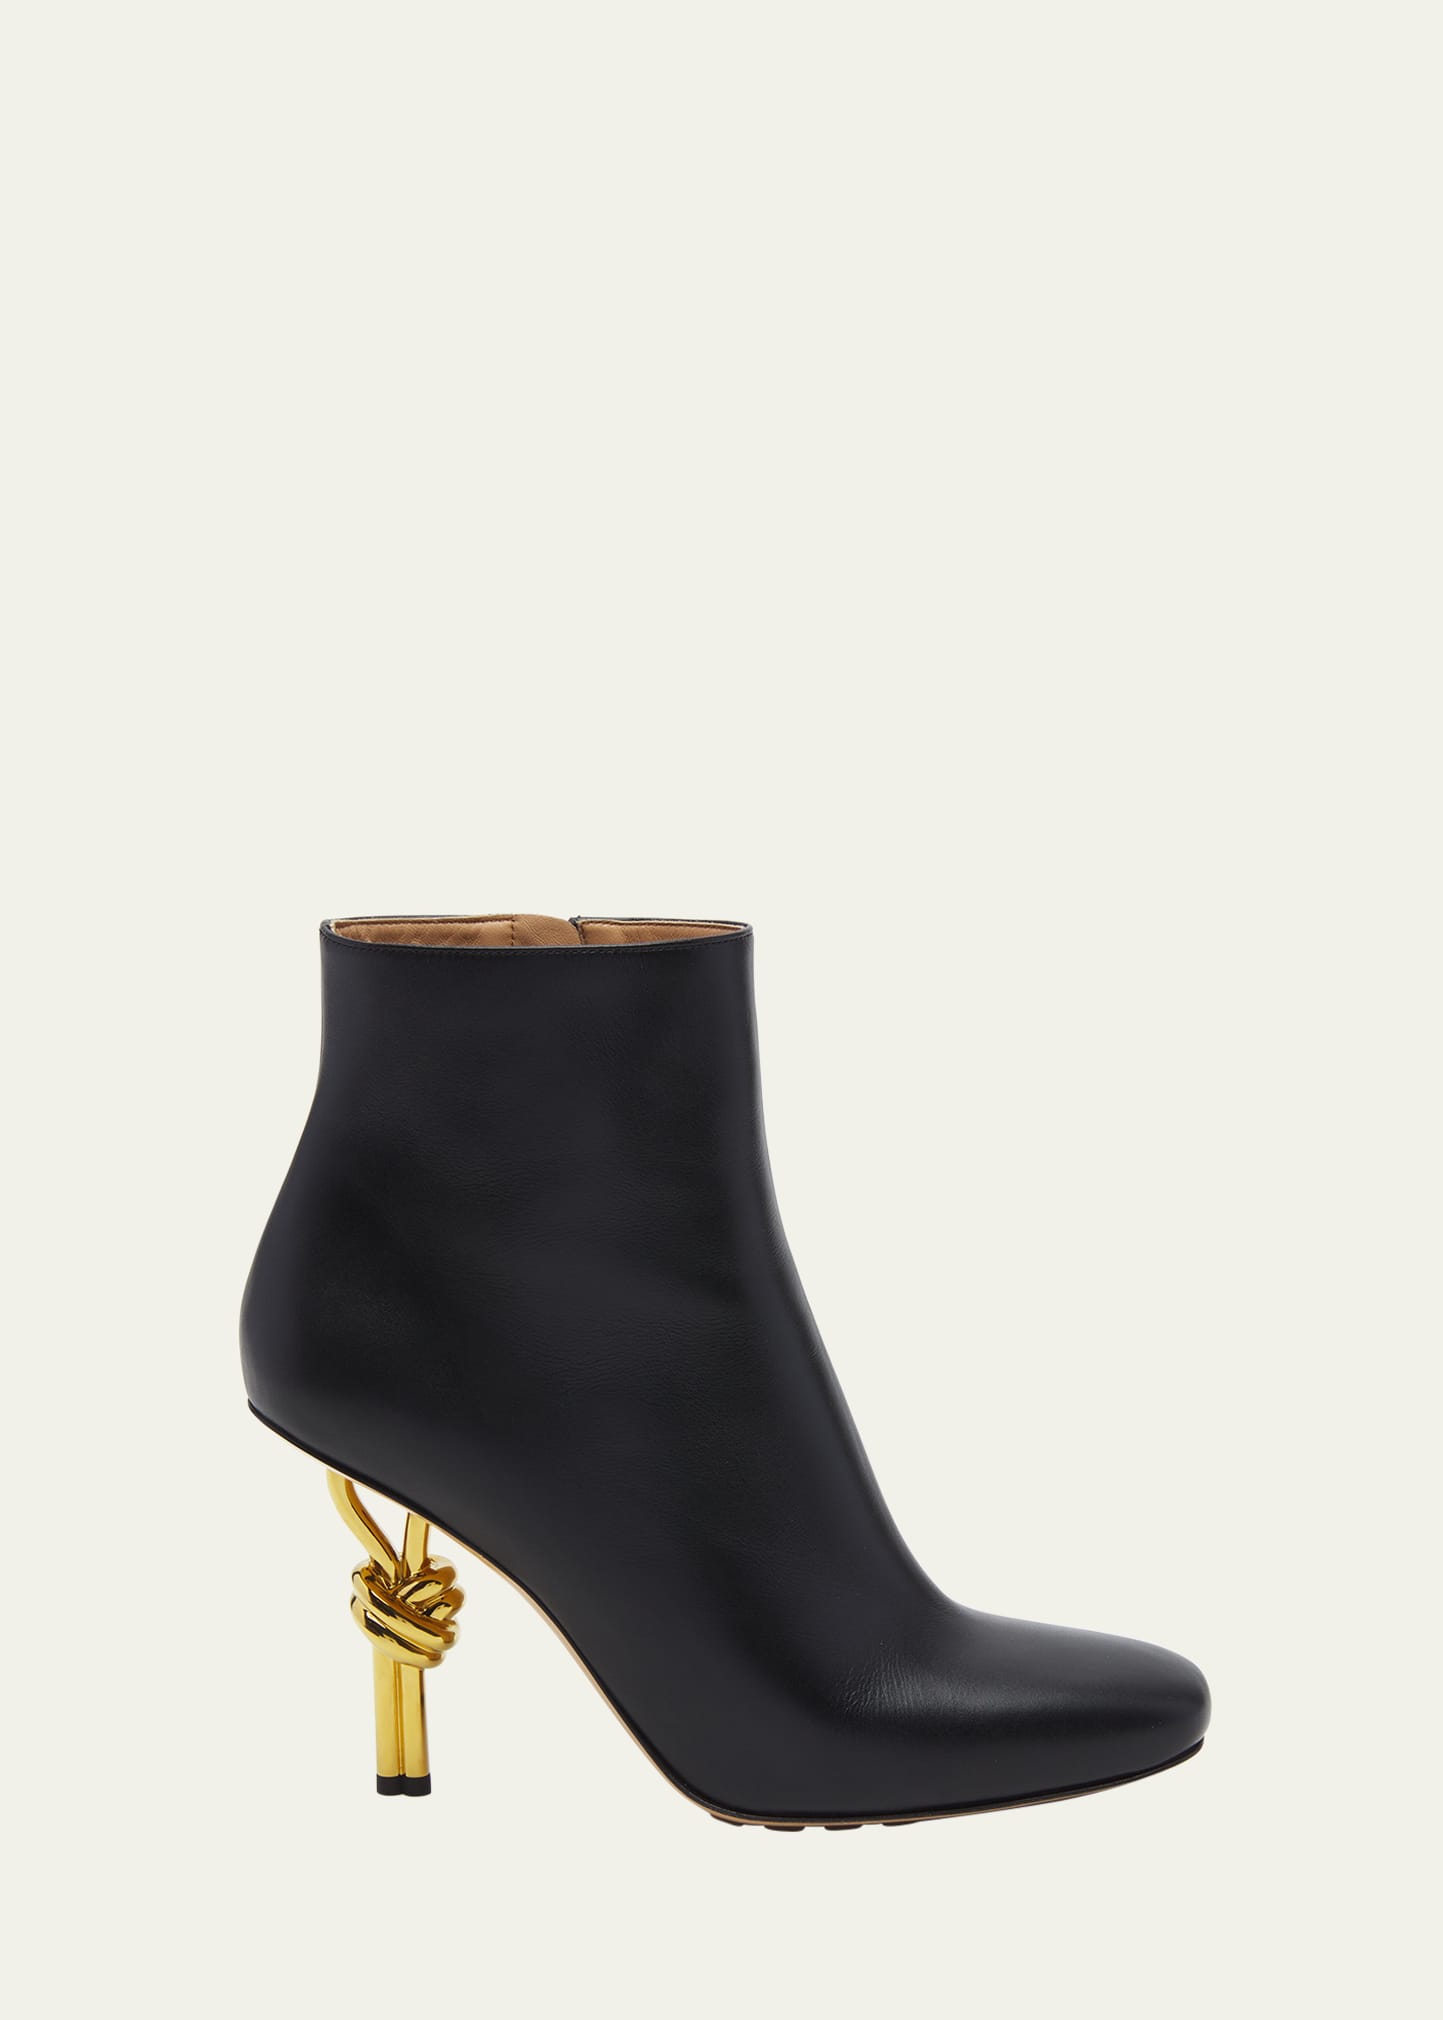 Leather Knot-Heel Ankle Boots